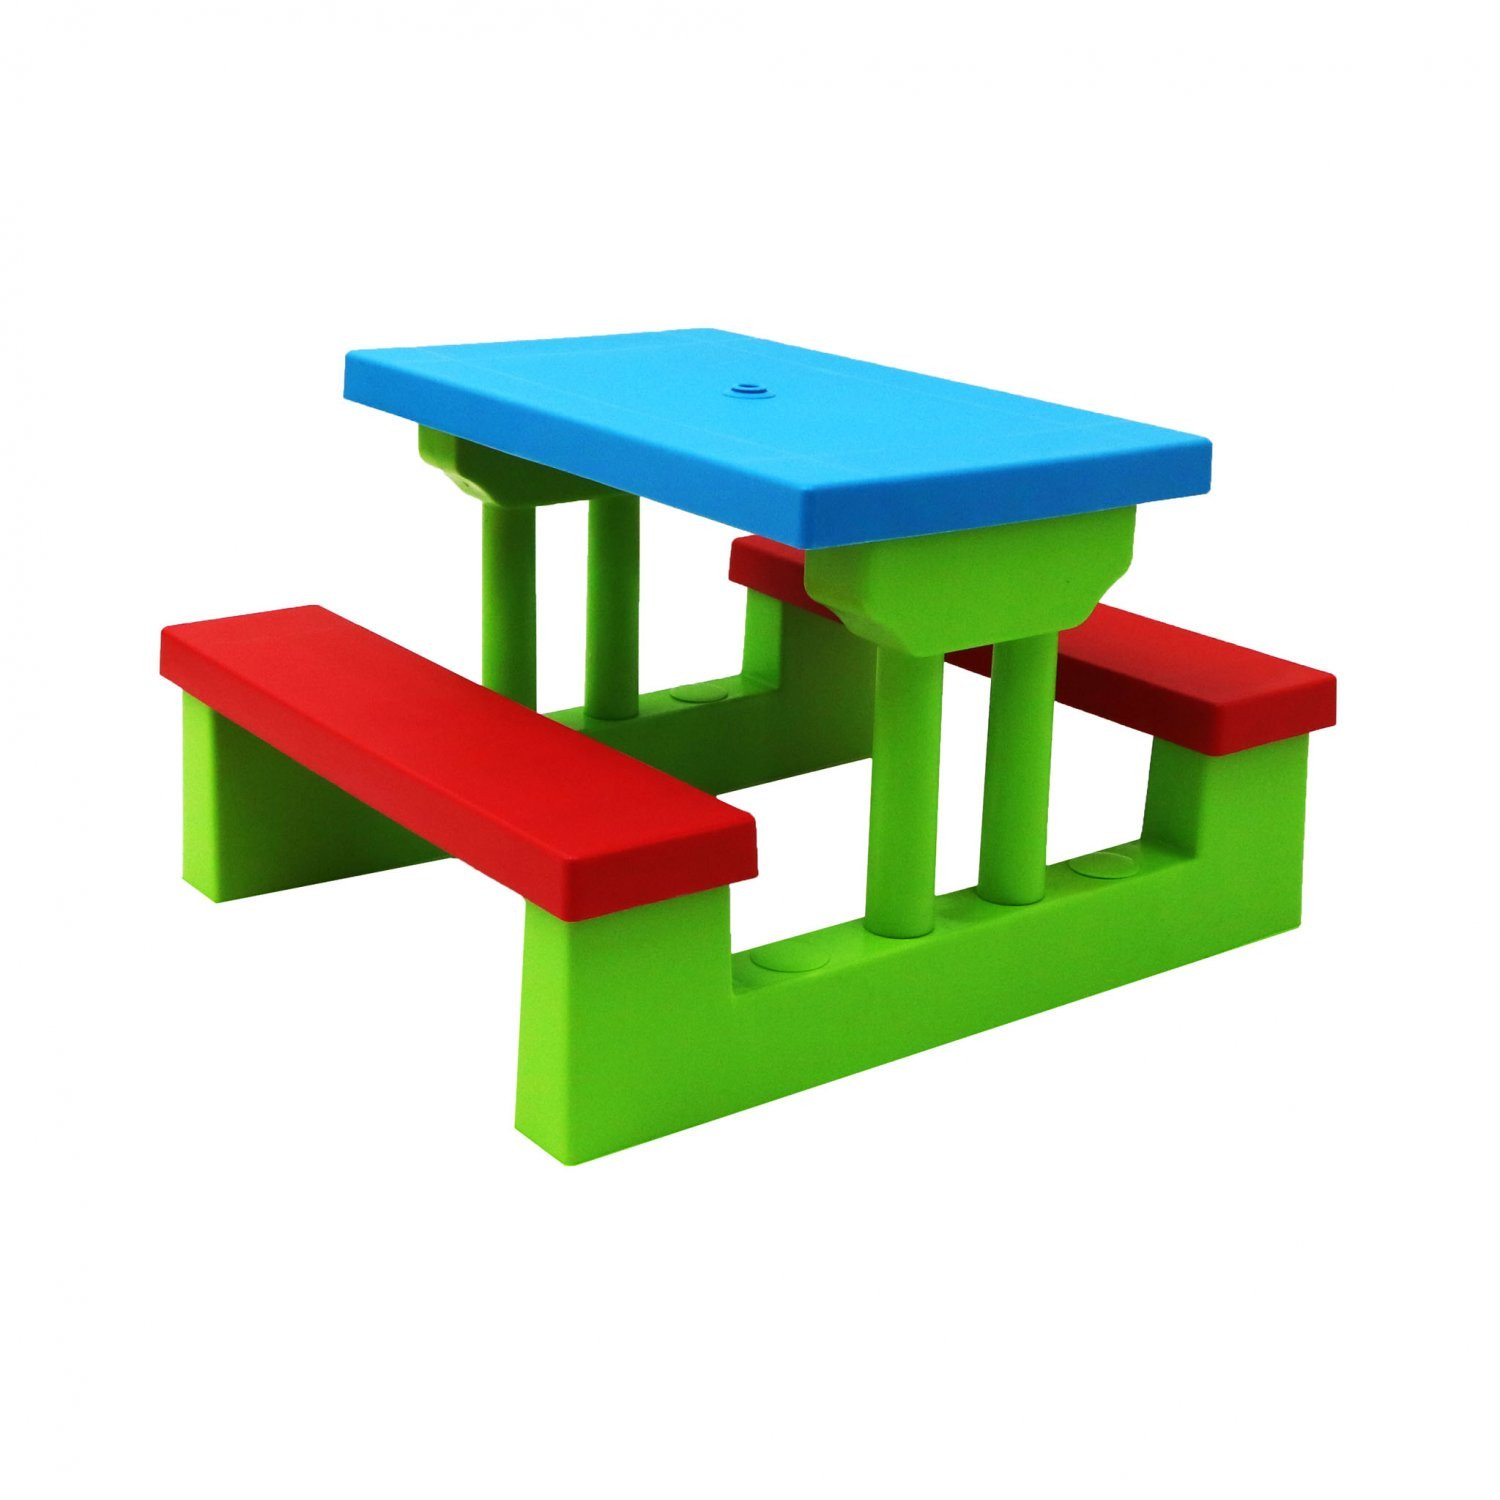 Kids Outdoor Table And Bench
 NEW Kids Childrens Picnic Bench Table Outdoor Garden